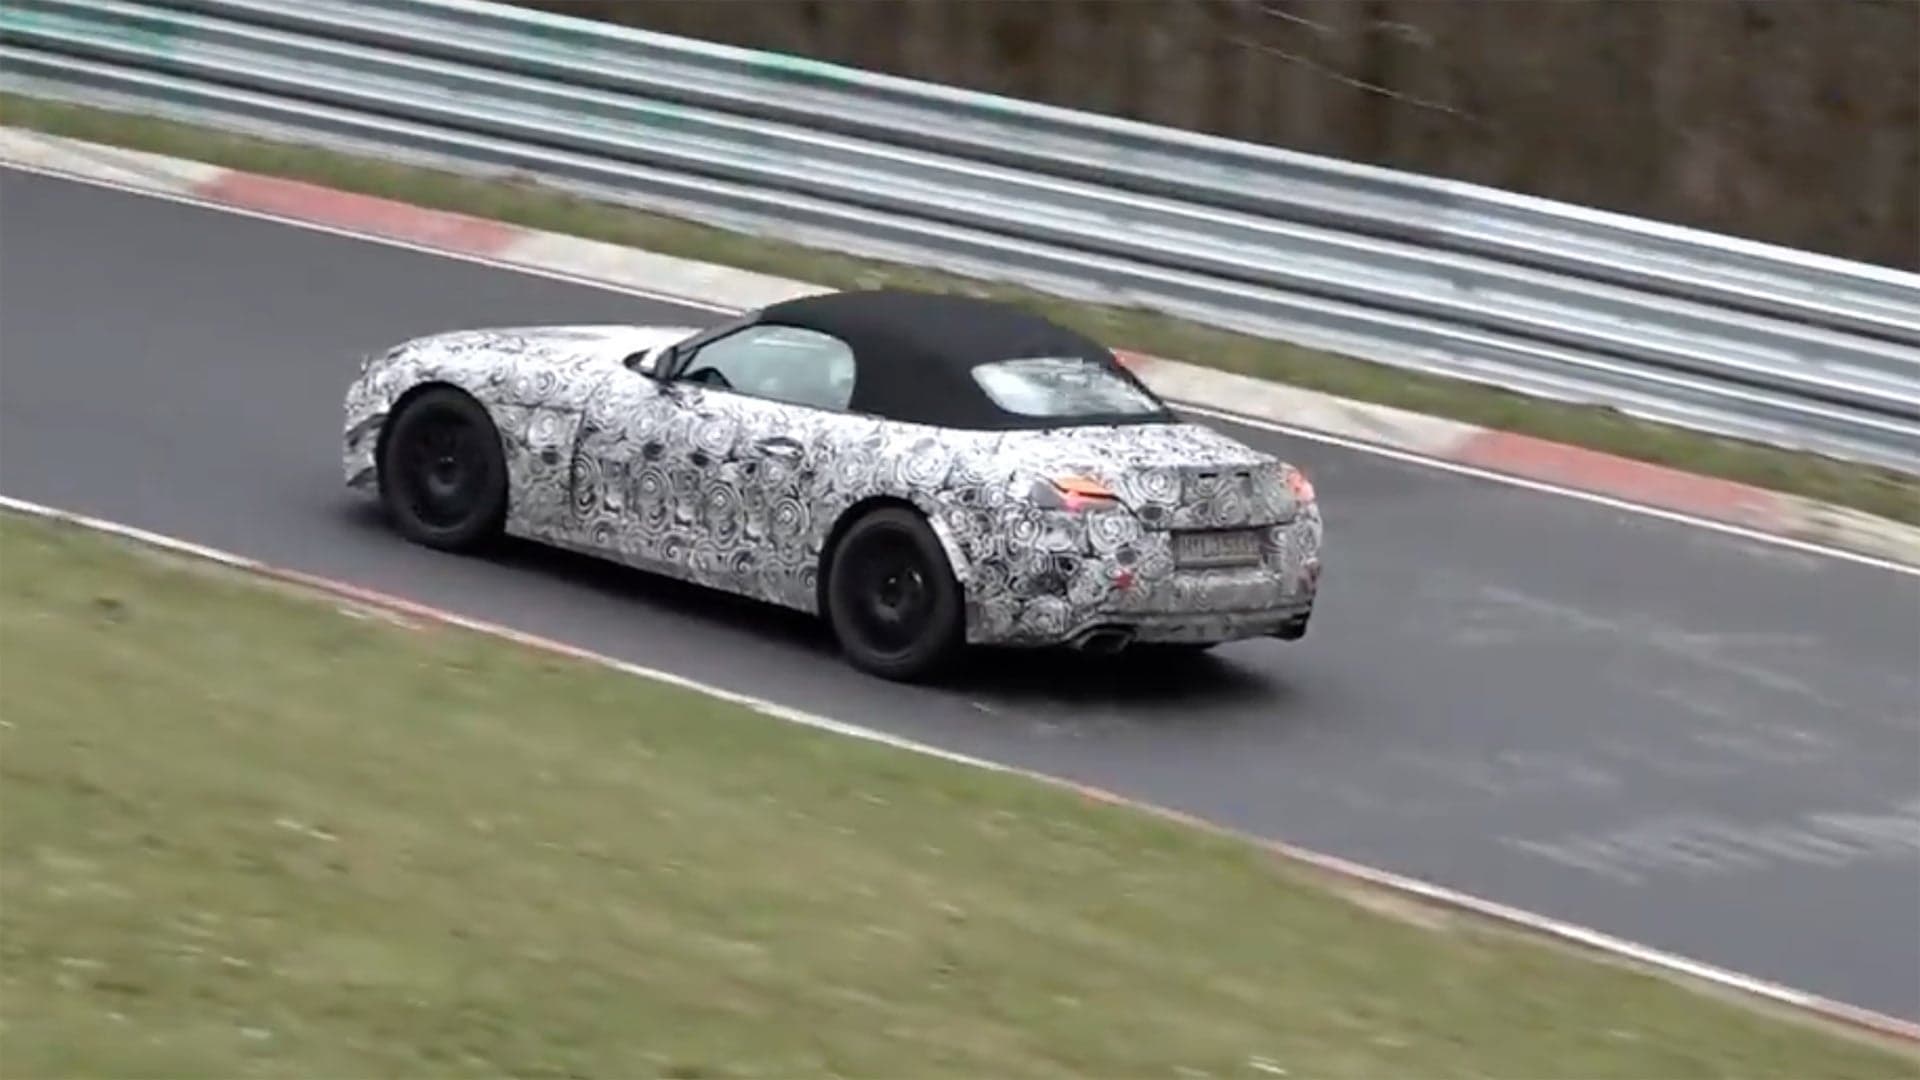 BMW Z4 Concept May Be Revealed at Pebble Beach in August